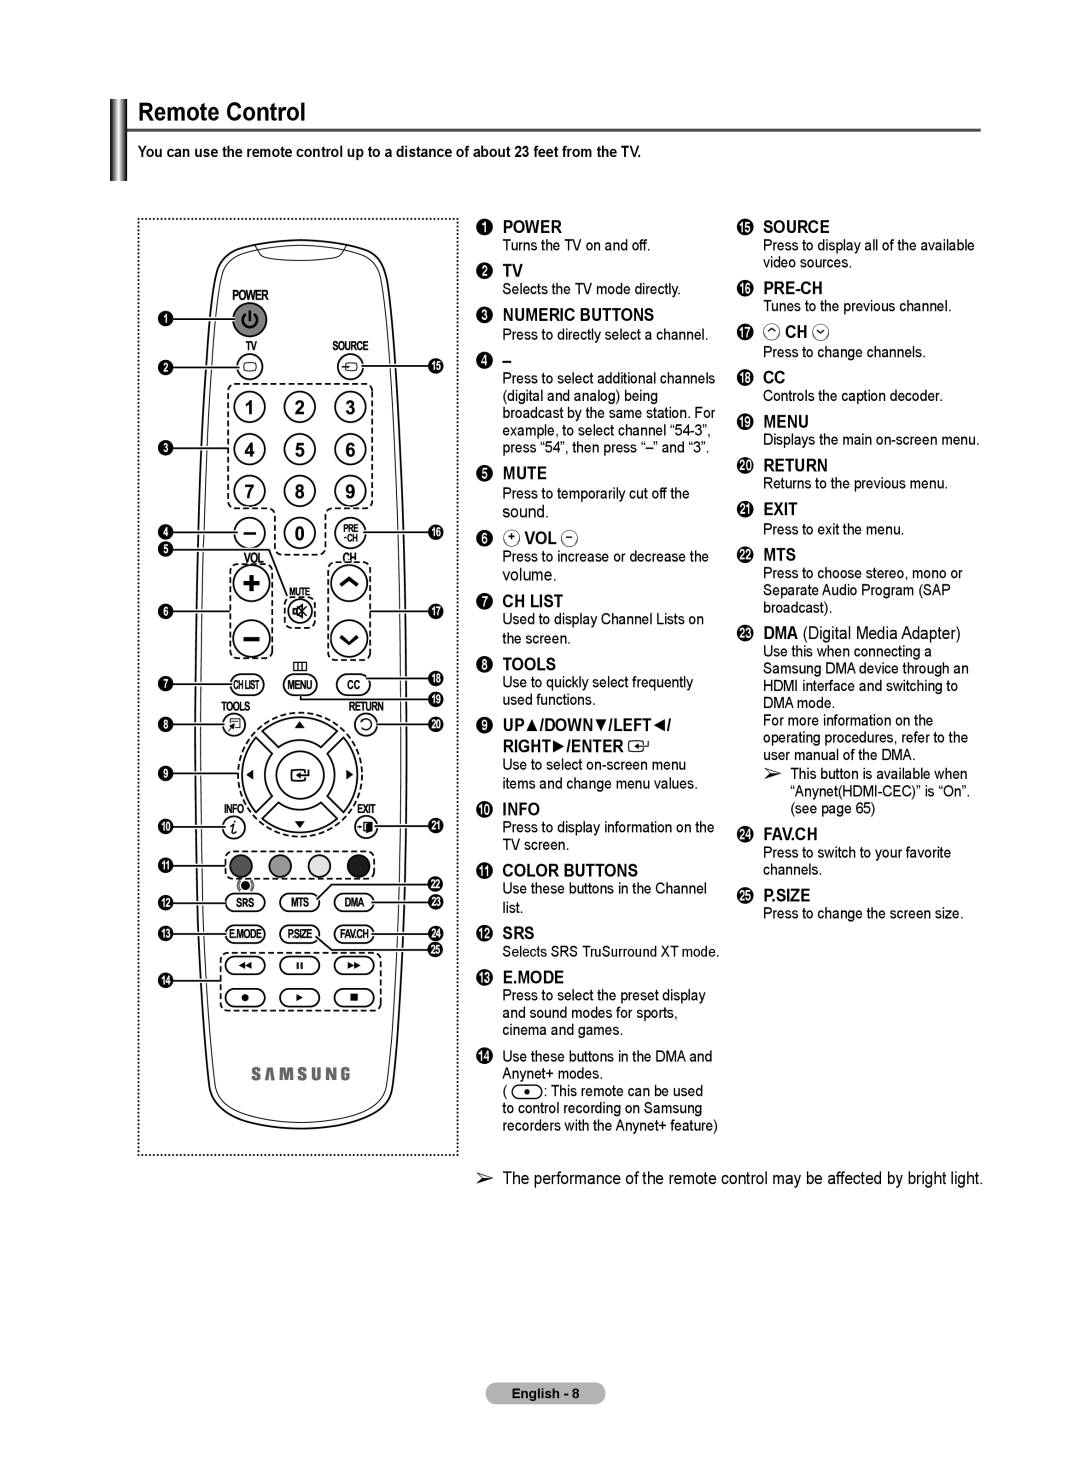 Samsung 460 Power, 2 TV, Numeric Buttons, Mute, 6 VOL, Ch List, Tools, 9 UP/DOWN/LEFT RIGHT/ENTER, Info, Color Buttons 